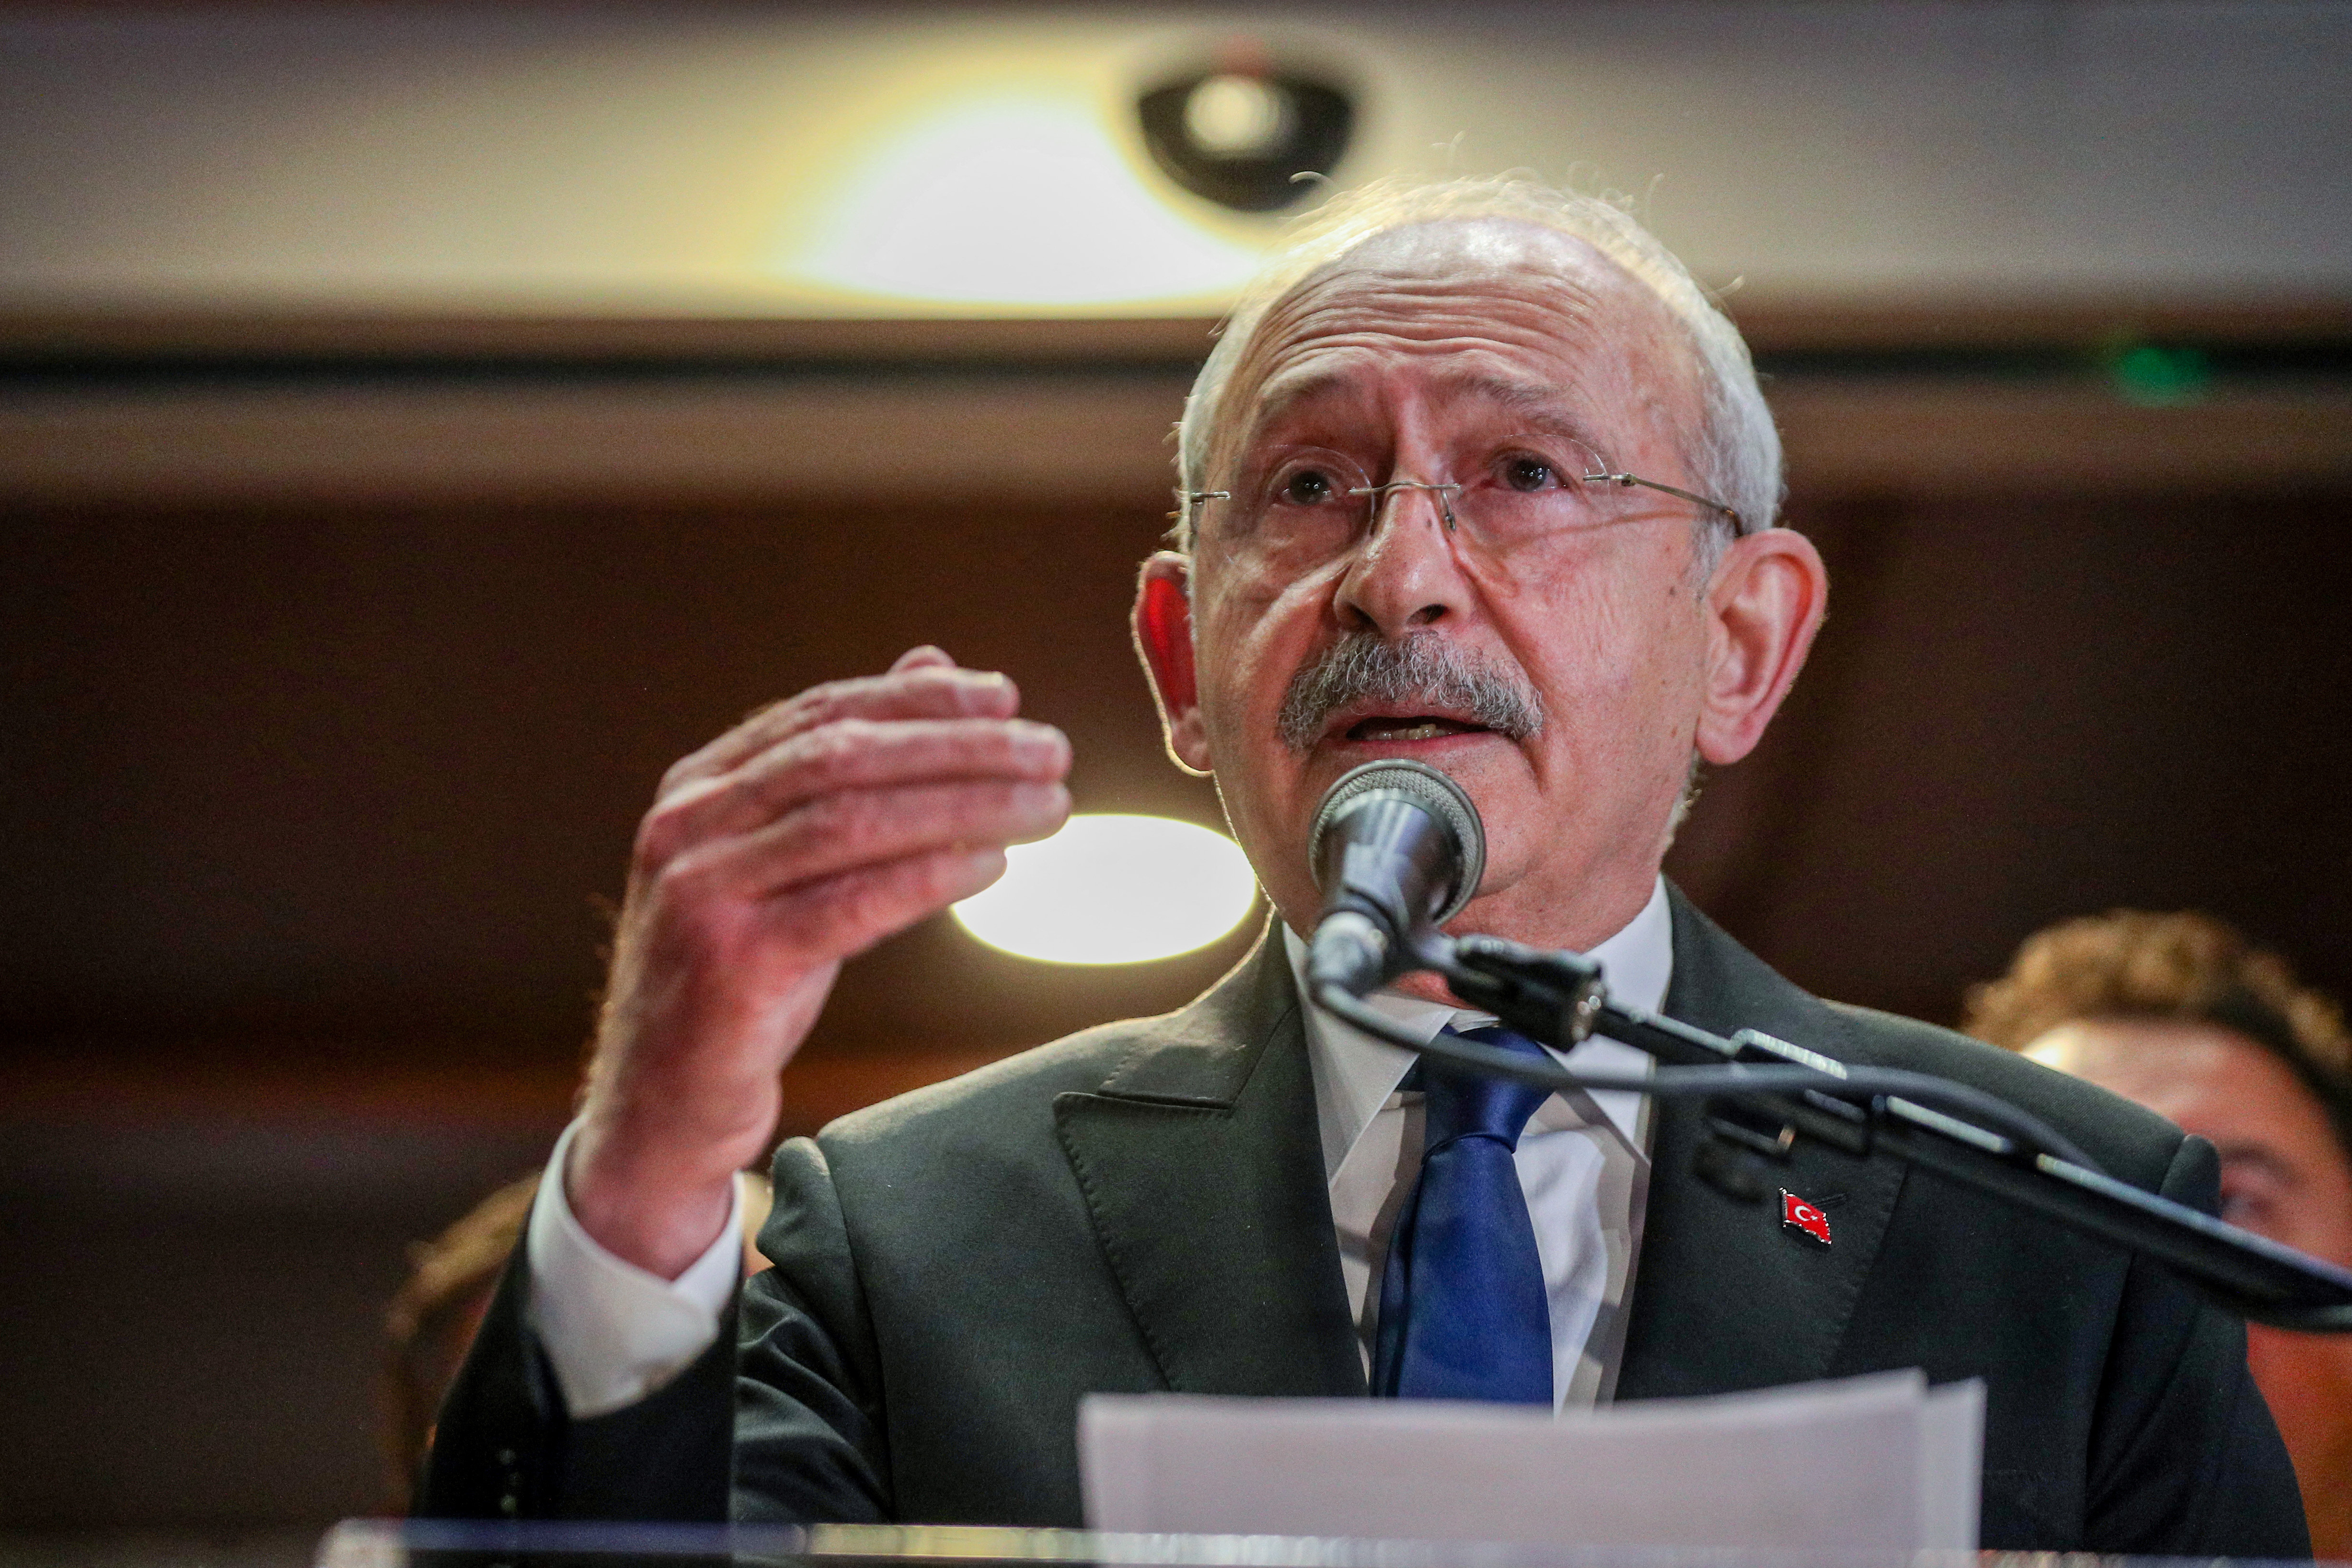 Turkey's opposition bloc names Kilicdaroglu as candidate in May election